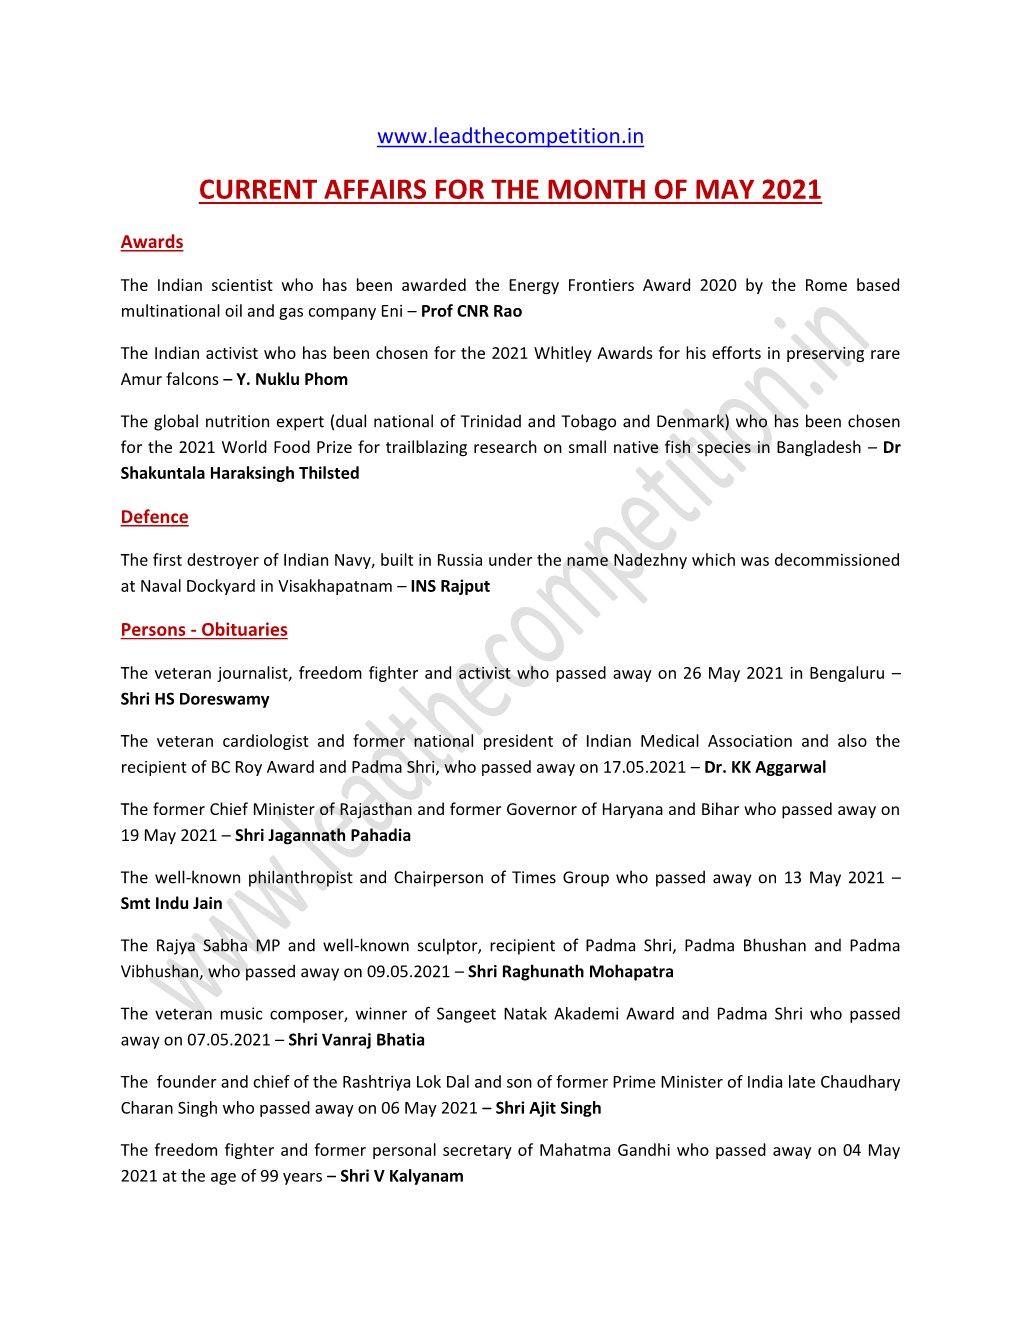 Current Affairs for the Month of May 2021